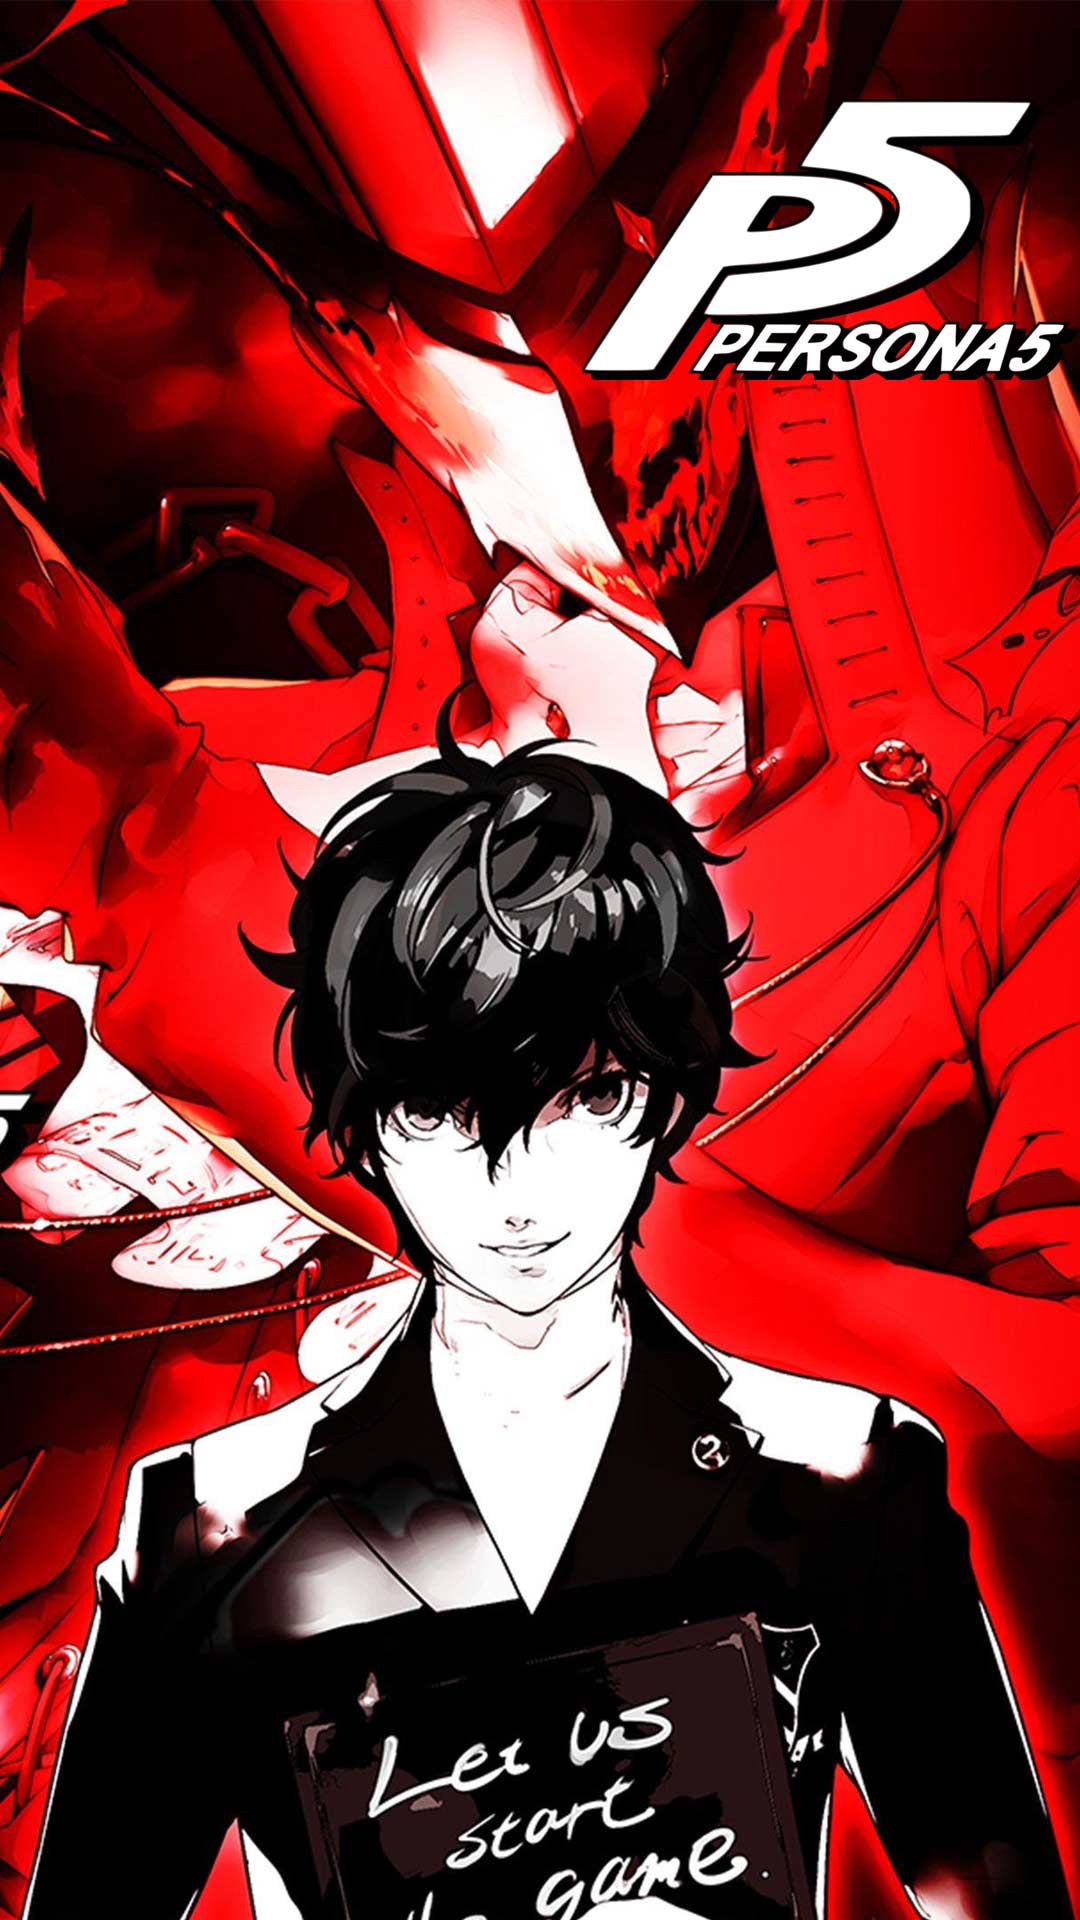 Persona 5 wallpaper phone background free download for android mobile